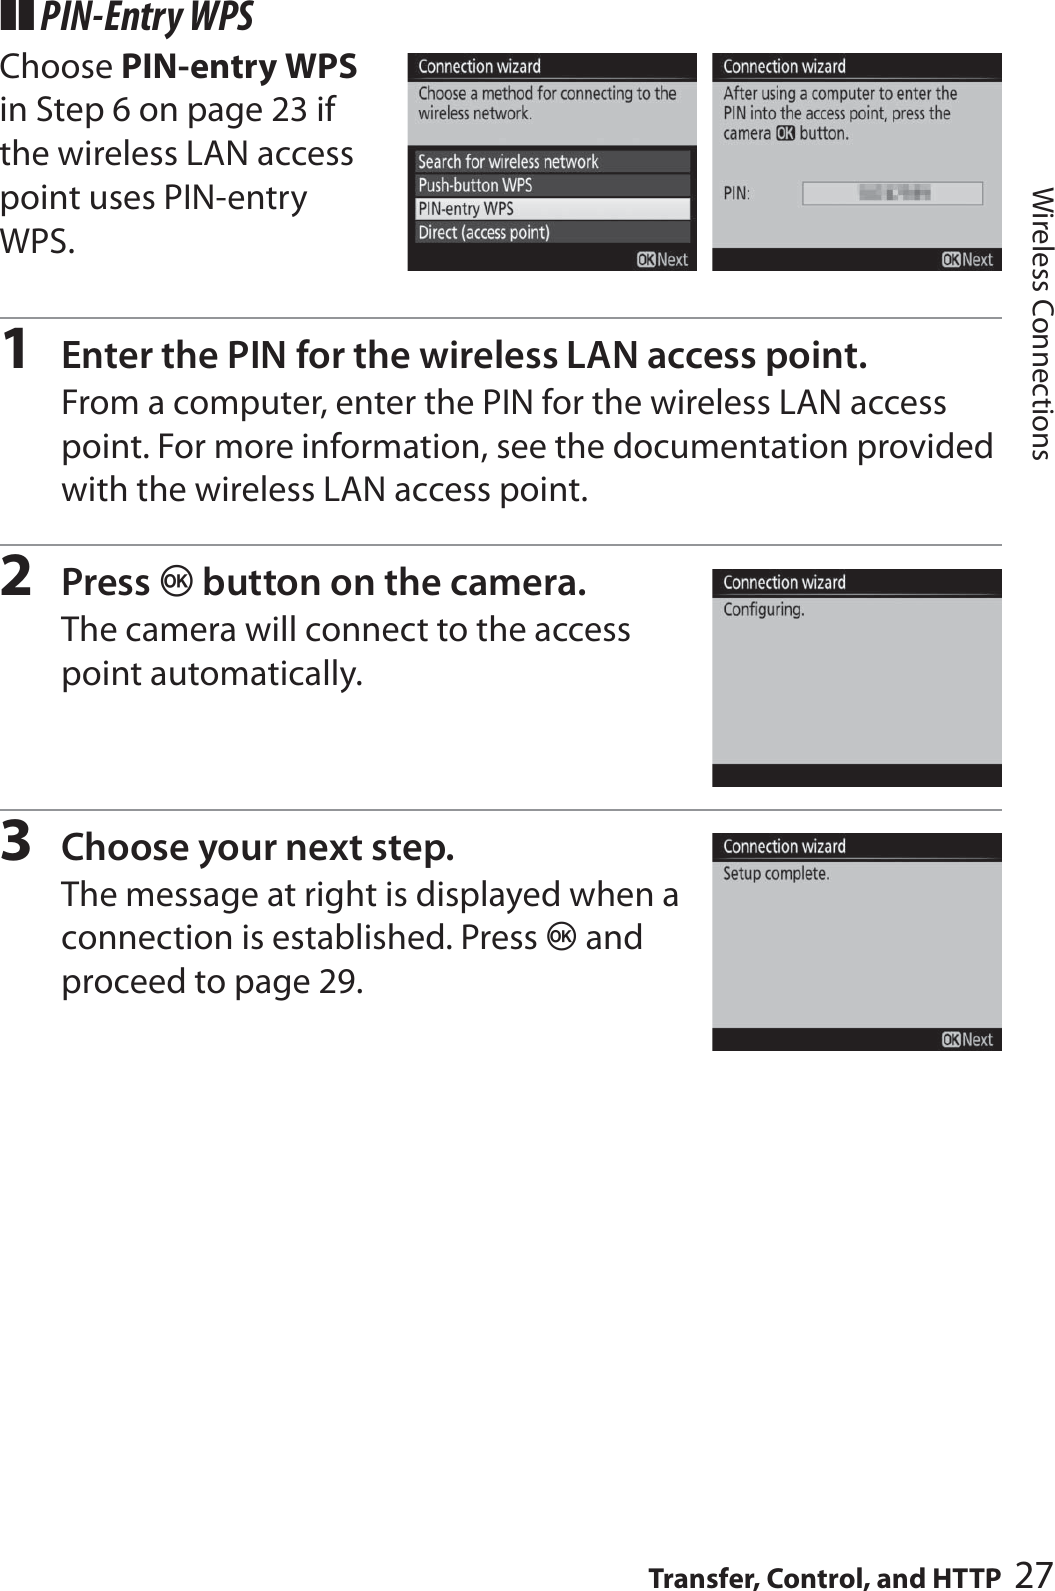 27Transfer, Control, and HTTPWireless Connections❚❚ PIN-Entry WPSChoose PIN-entry WPS in Step 6 on page 23 if the wireless LAN access point uses PIN-entry WPS.1Enter the PIN for the wireless LAN access point.From a computer, enter the PIN for the wireless LAN access point. For more information, see the documentation provided with the wireless LAN access point.2Press J button on the camera. The camera will connect to the access point automatically.3Choose your next step.The message at right is displayed when a connection is established. Press J and proceed to page 29.